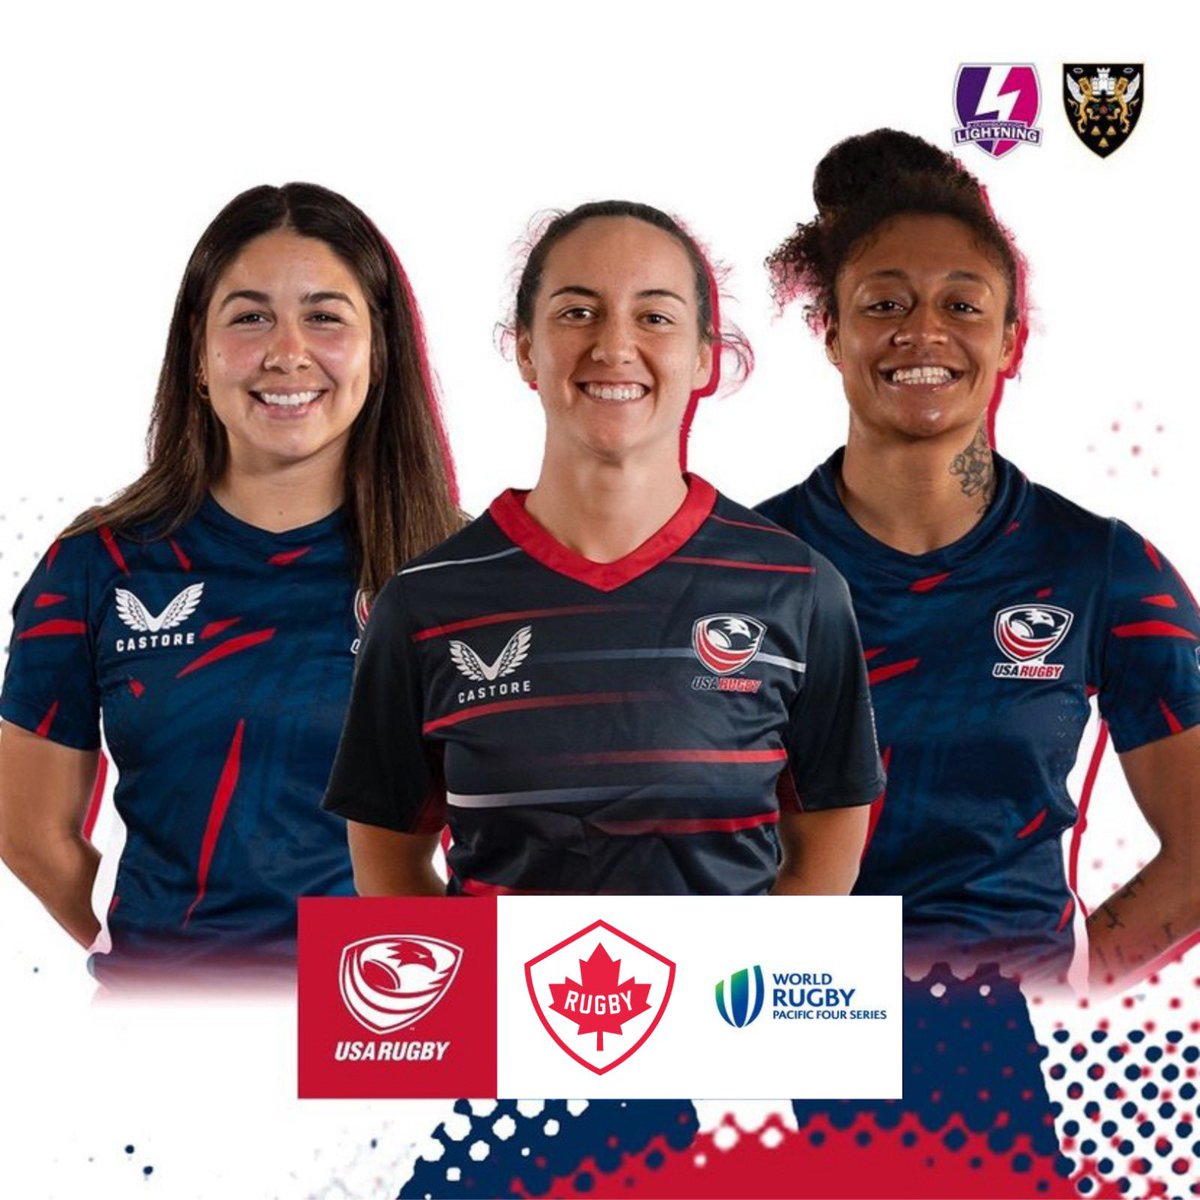 Loughborough ➡️ Los Angeles 😎 Good luck to the Lightning trio of Kathryn Treder, Hallie Taufoou and Bulou Mataitoga as they represent @USAWomenEagles in their Pacific Four Series opener today against Canada! #lightningstrikes⚡️🇺🇸